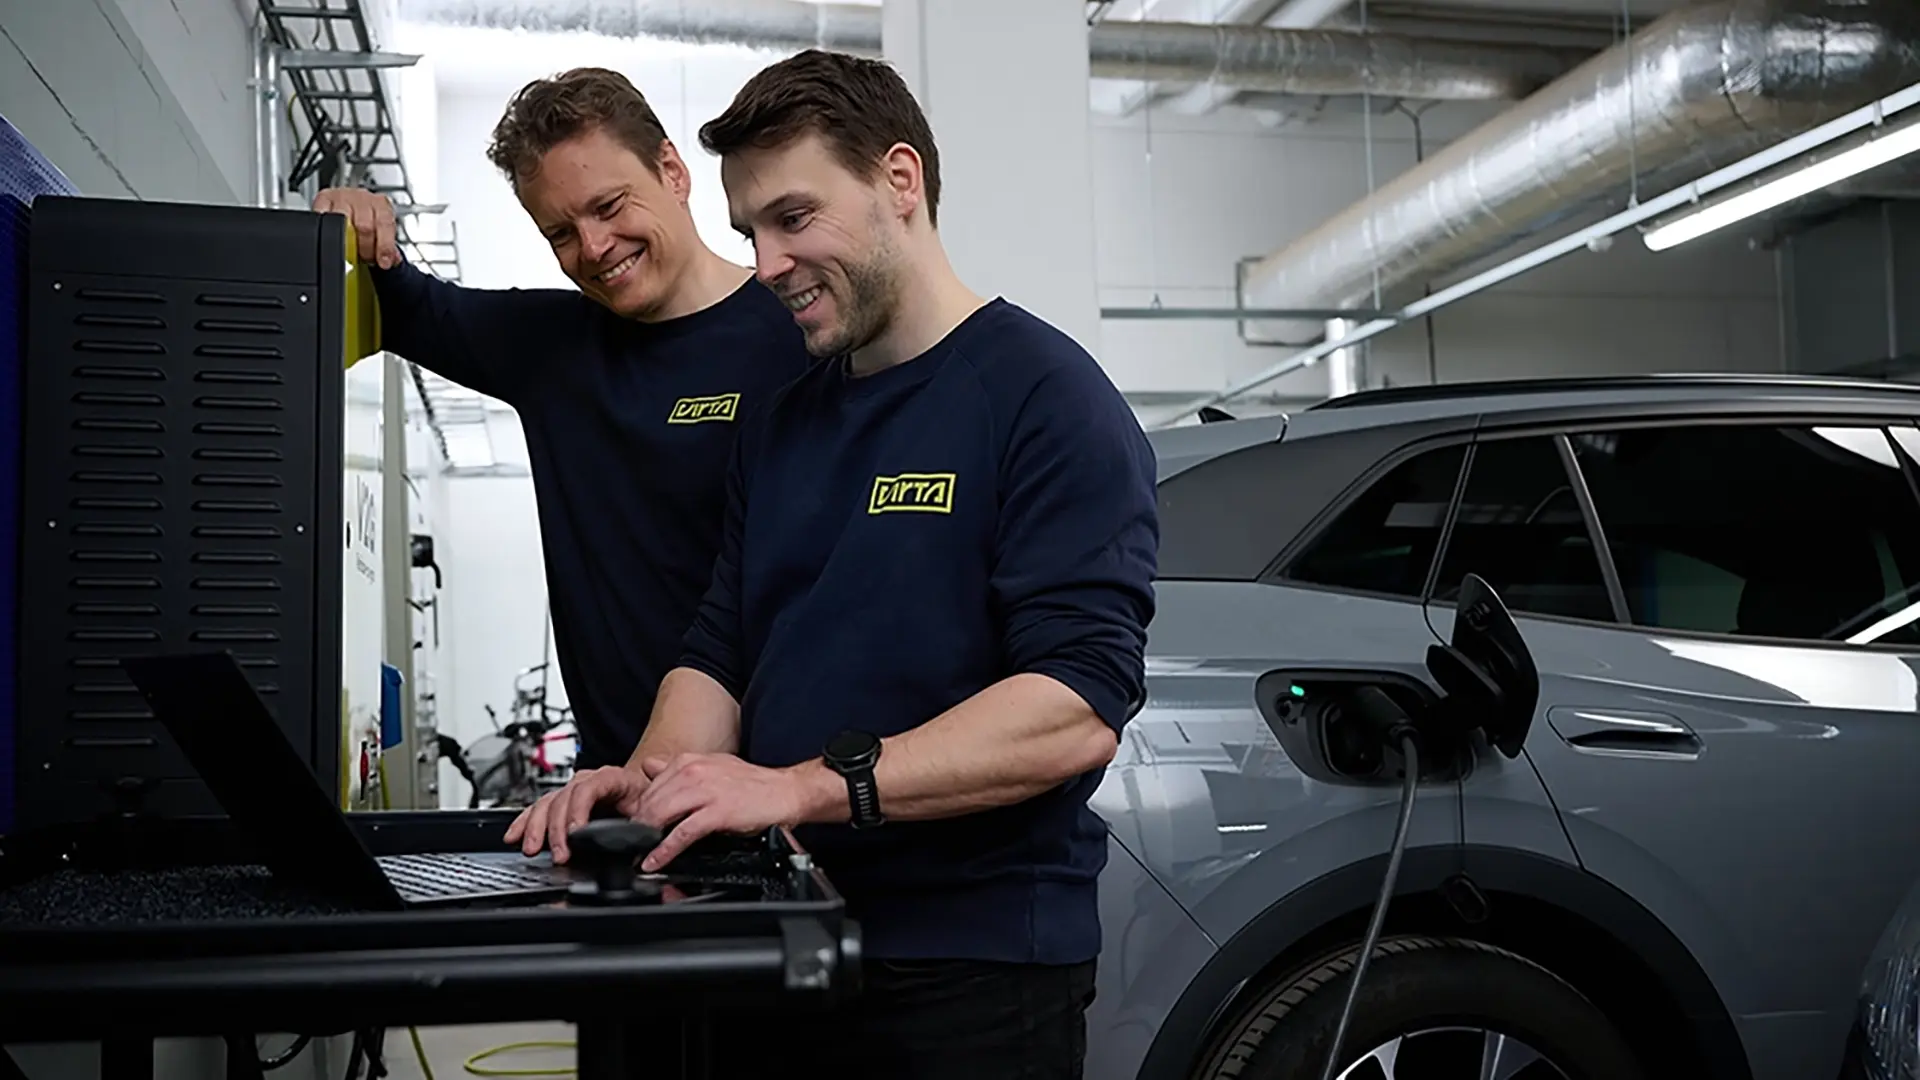 Two men working next to a charging car in a garage